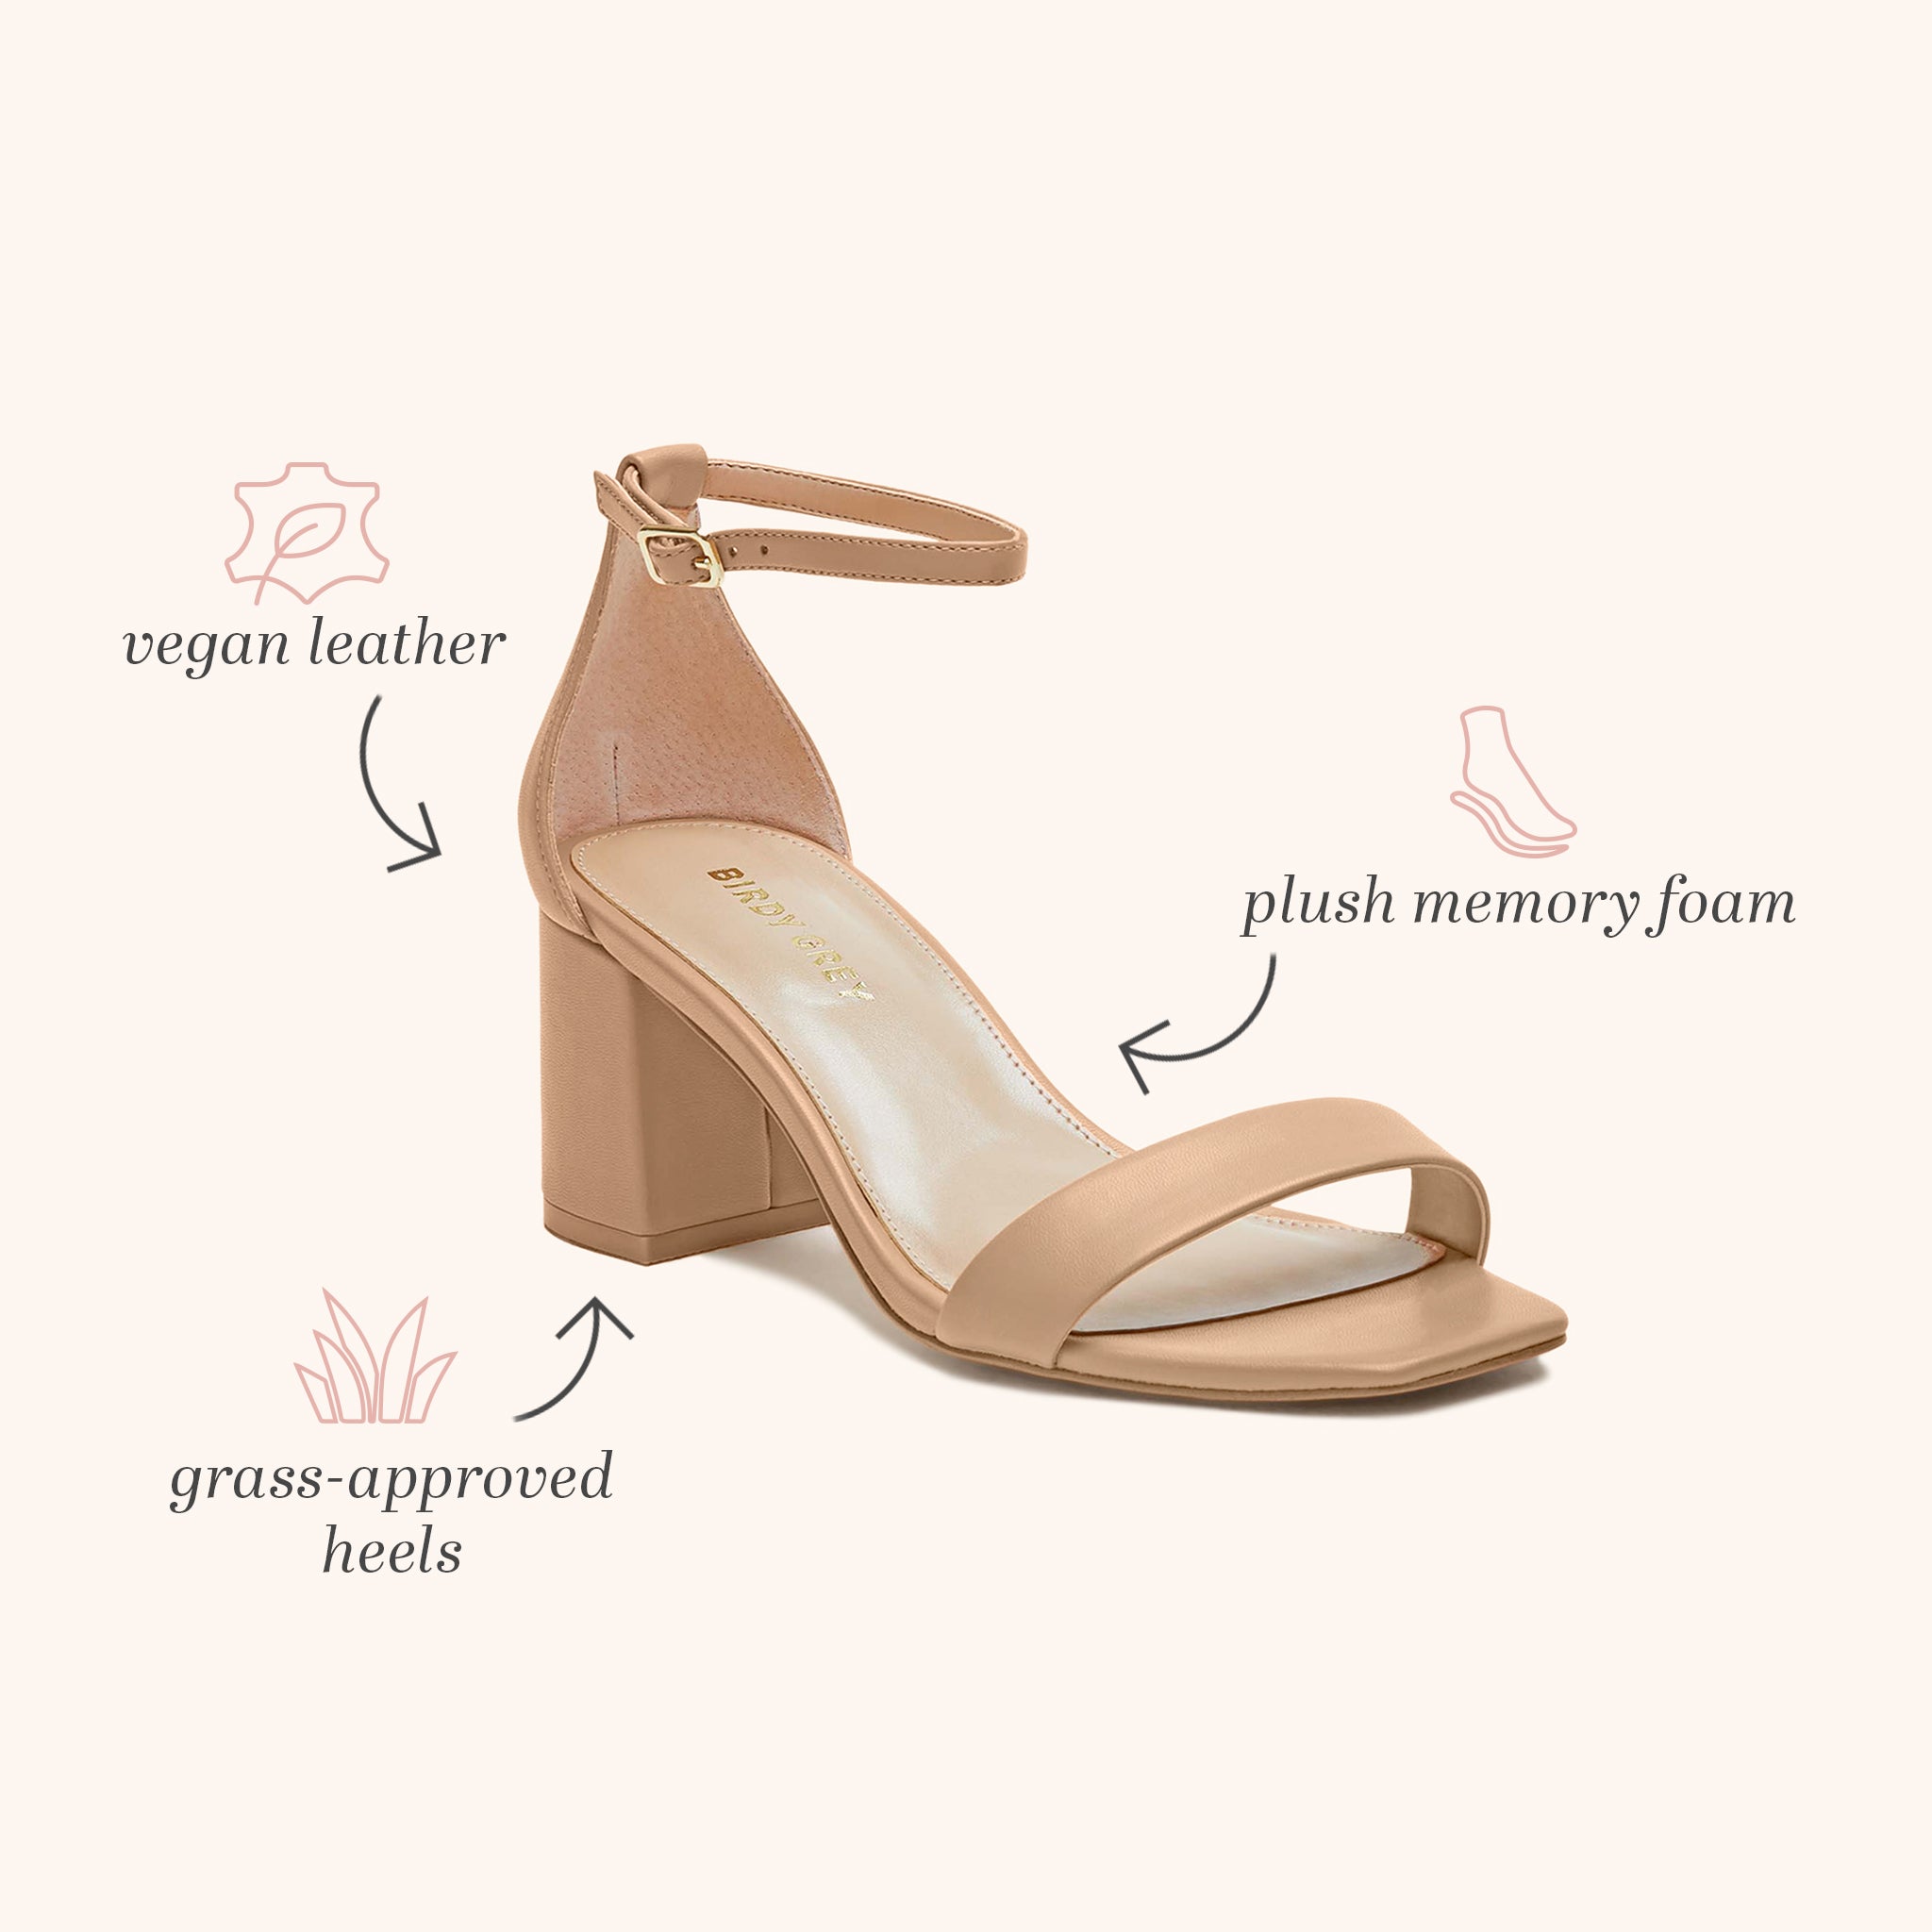 Natalie chunky Heel in nude latte by Birdy Grey, side view